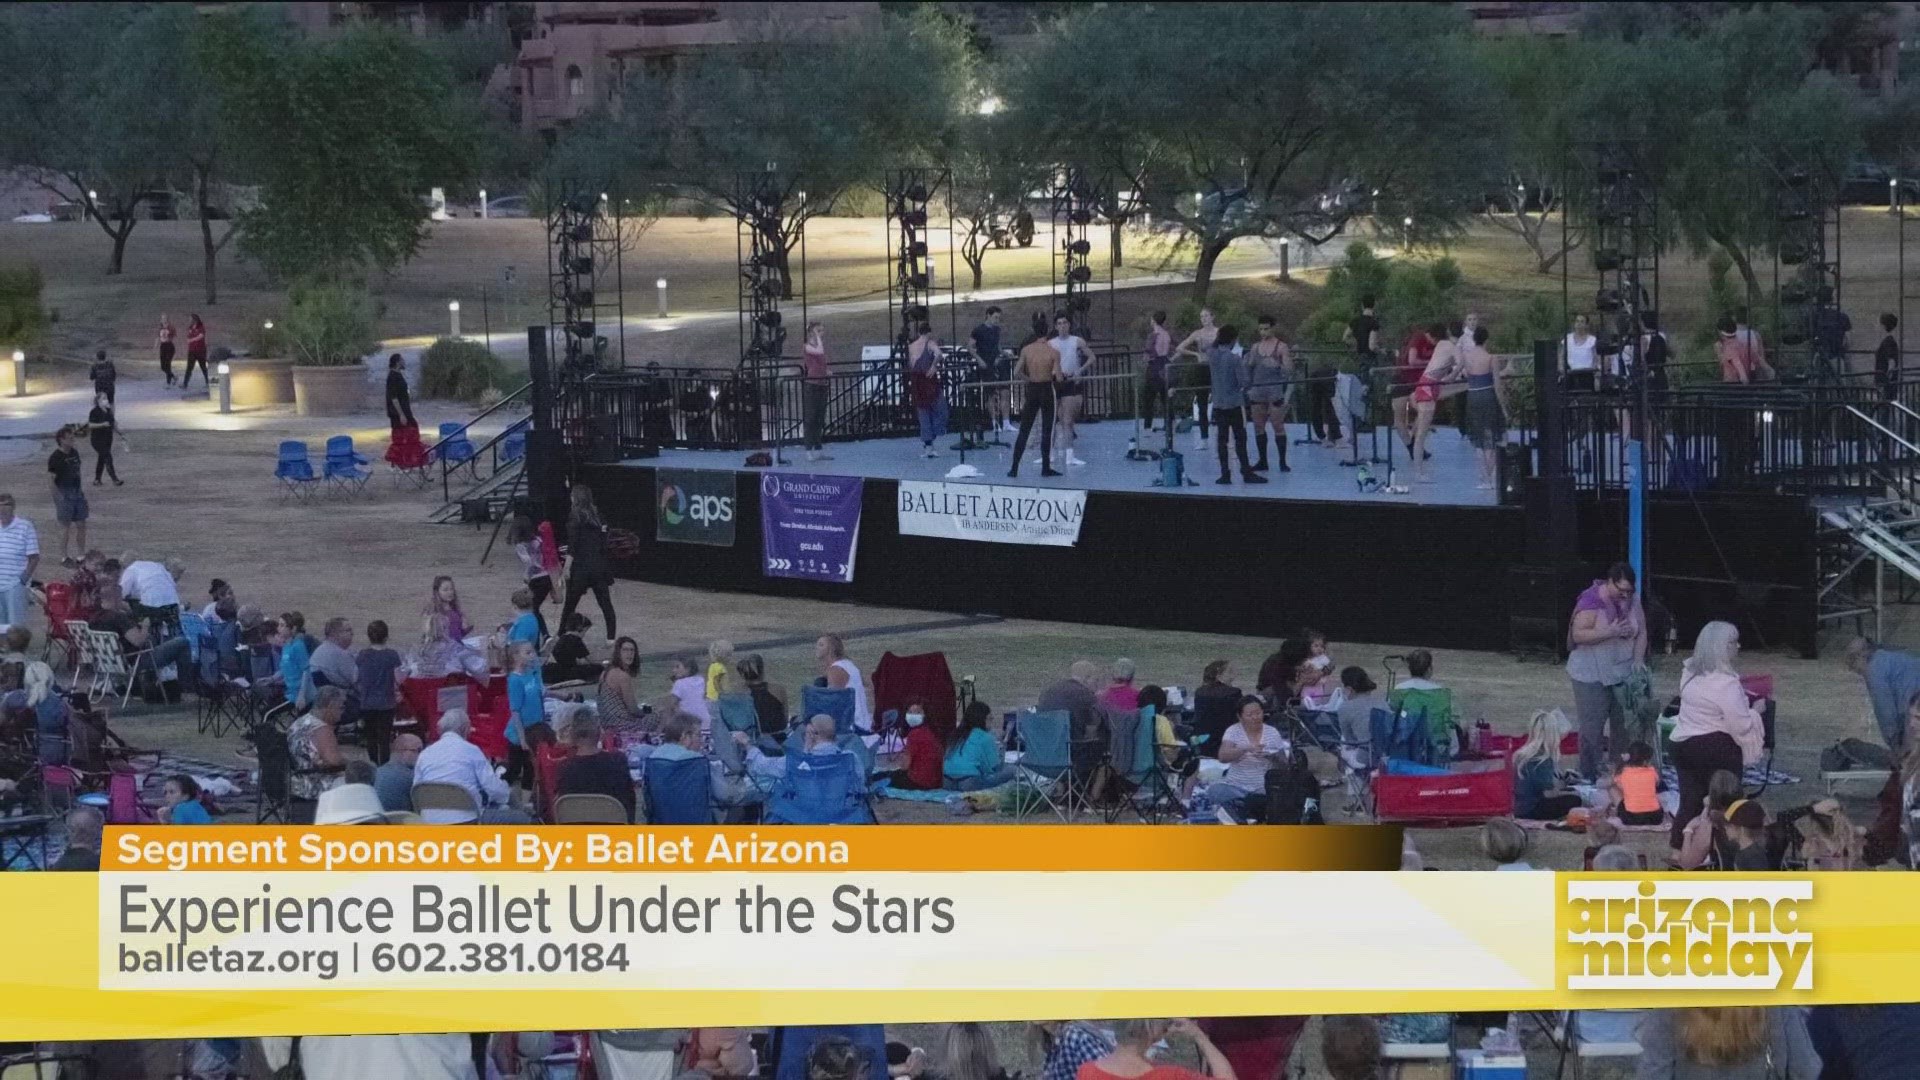 Ballet Arizona presents Ballet Under the Stars where they offer performances at parks around the Valley for free.